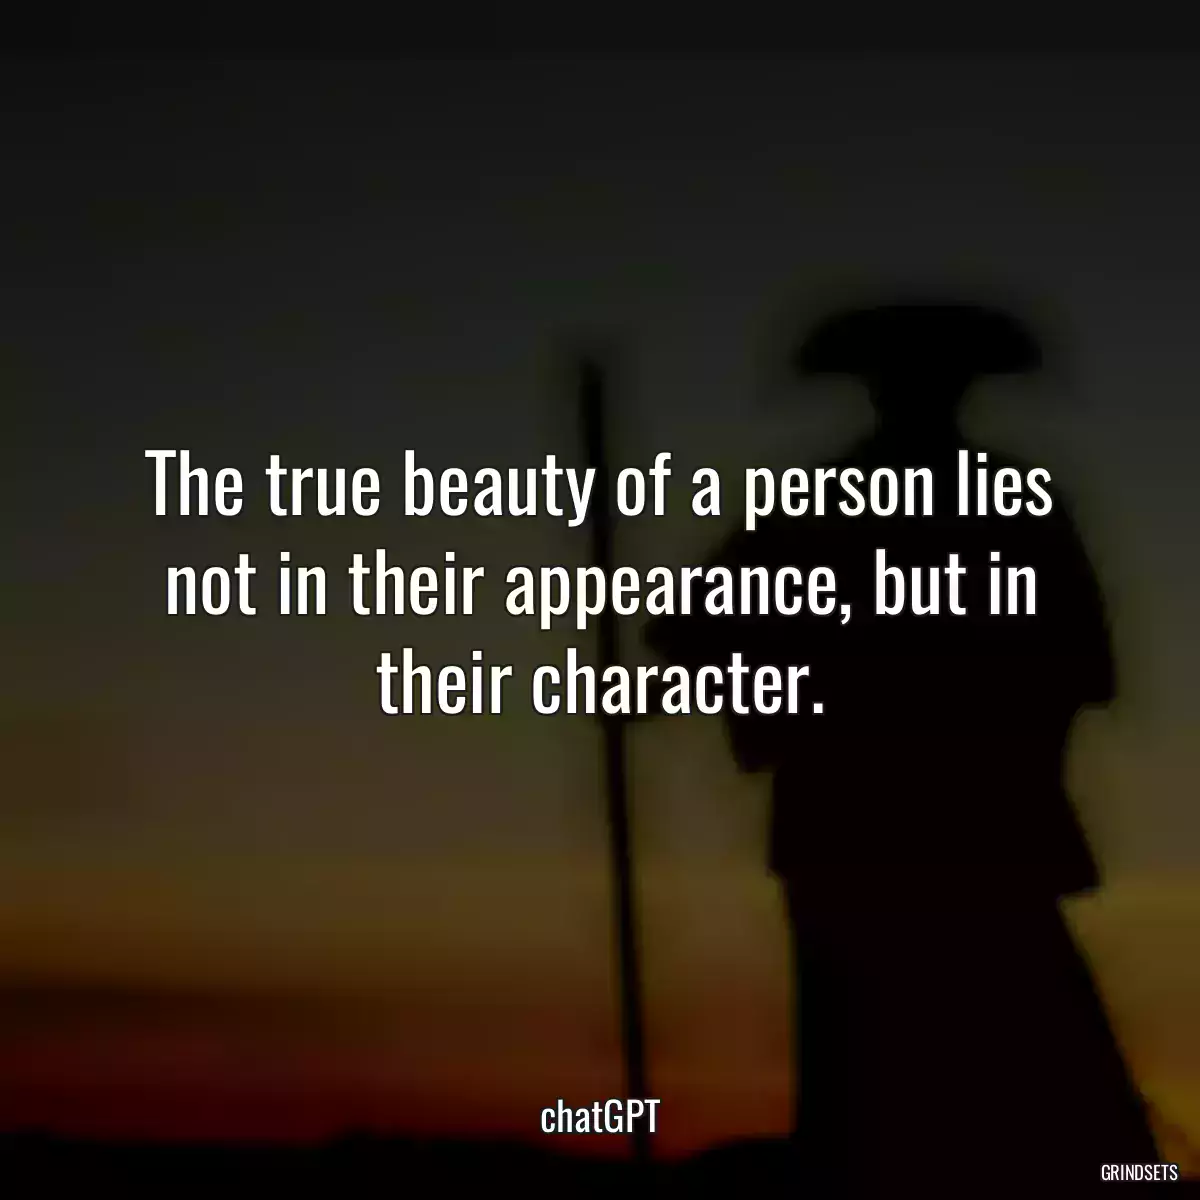 The true beauty of a person lies not in their appearance, but in their character.